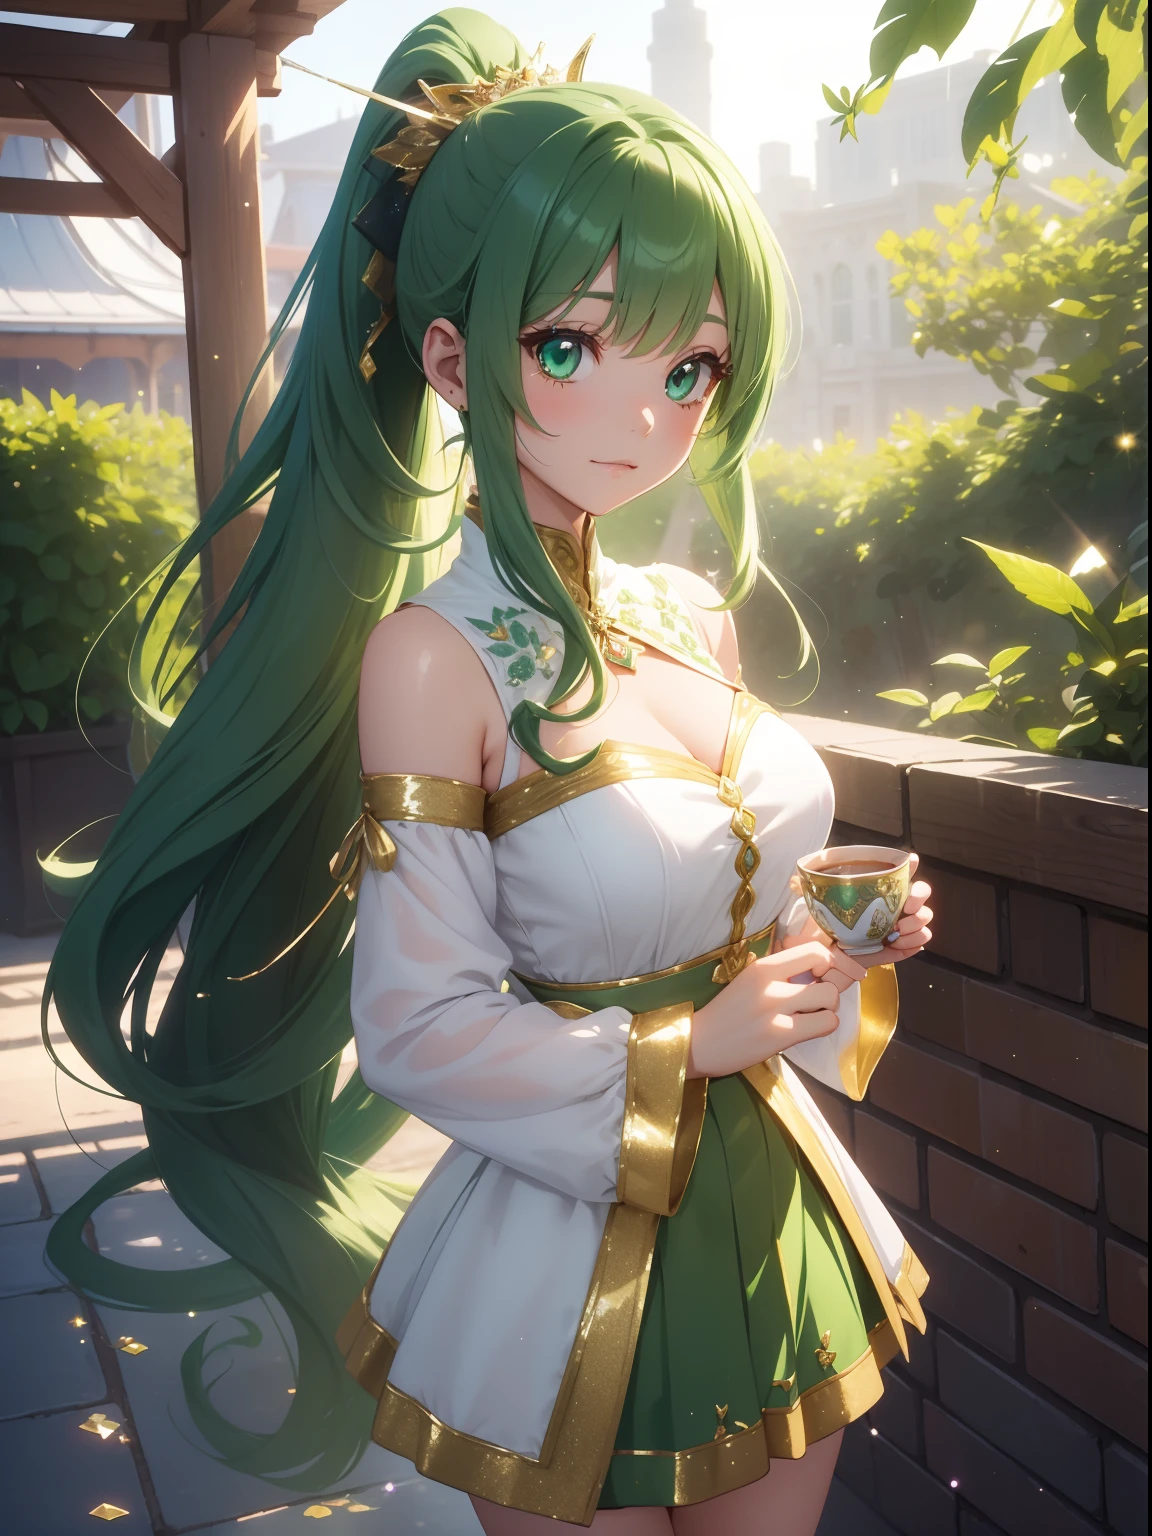 masutepiece, High resolution, 8K, anime woman, Delicate and detailed writing 、Detailed digital illustration、absurdly long hair、(((Ponytail)))、Shiny hair、a very beautiful woman、Eyes are double, Large,Little hanging eyes、 Bust E Cup、High image quality, High quality、Detailed background、(((Wearing idol clothes)))、(Fashionable café background))、The inside of the eye shines like a diamond、(((Dark green hair)))、Gradient pupil、(((2 arms、4 fingers, 1 thumb)))、Detailed female face、a very beautiful woman、、Detailed background、​masterpiece、Soft Focus , Bright gradient watercolor , Lens Flare , (((glitter))) , Glow , Dreamy , (((Holding tea in hand)))、a miniskirt、idol、Light Green Ribbon、Very beautiful light green rose hair accessories、Light green and gold costume with white as the main color、((ass pov))、Cool Girl).Tall lady、Dignified.((No bangs))、A smile